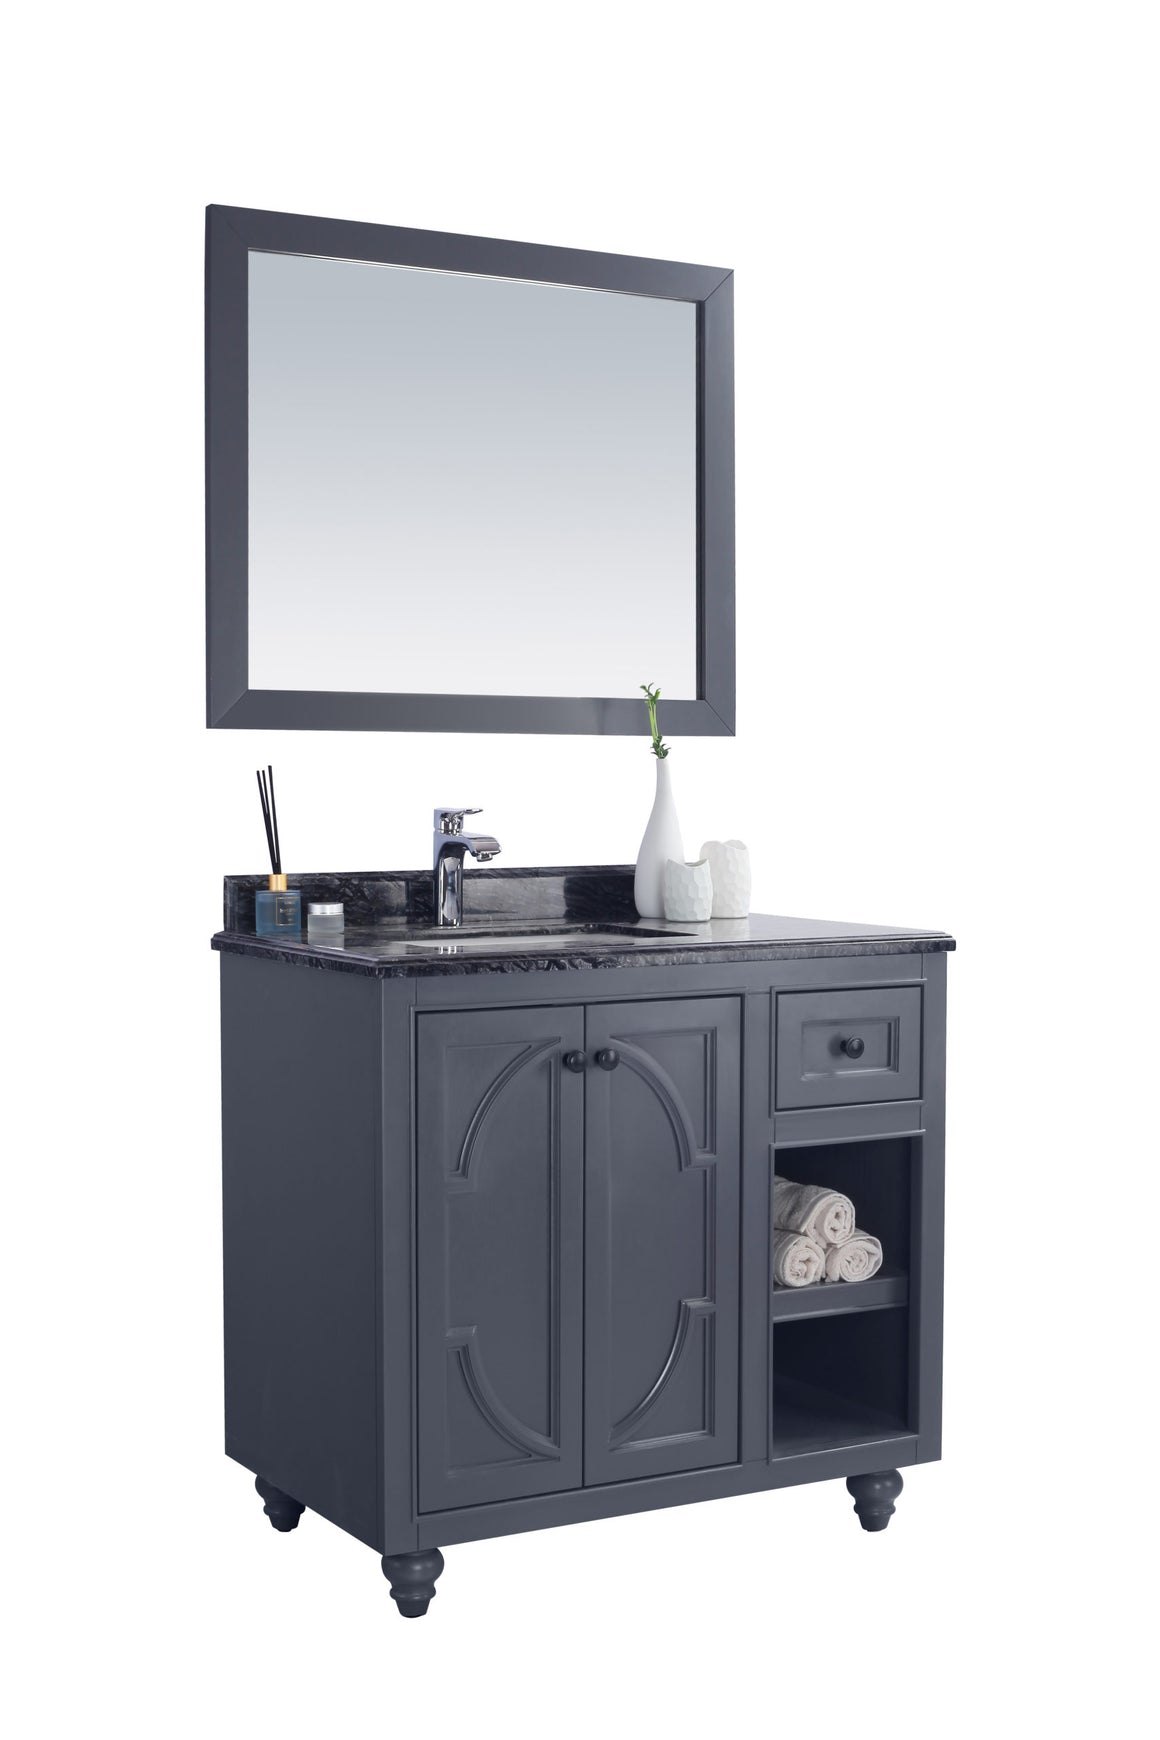 Odyssey - 36 - Maple Grey Cabinet + Black Wood Marble Countertop